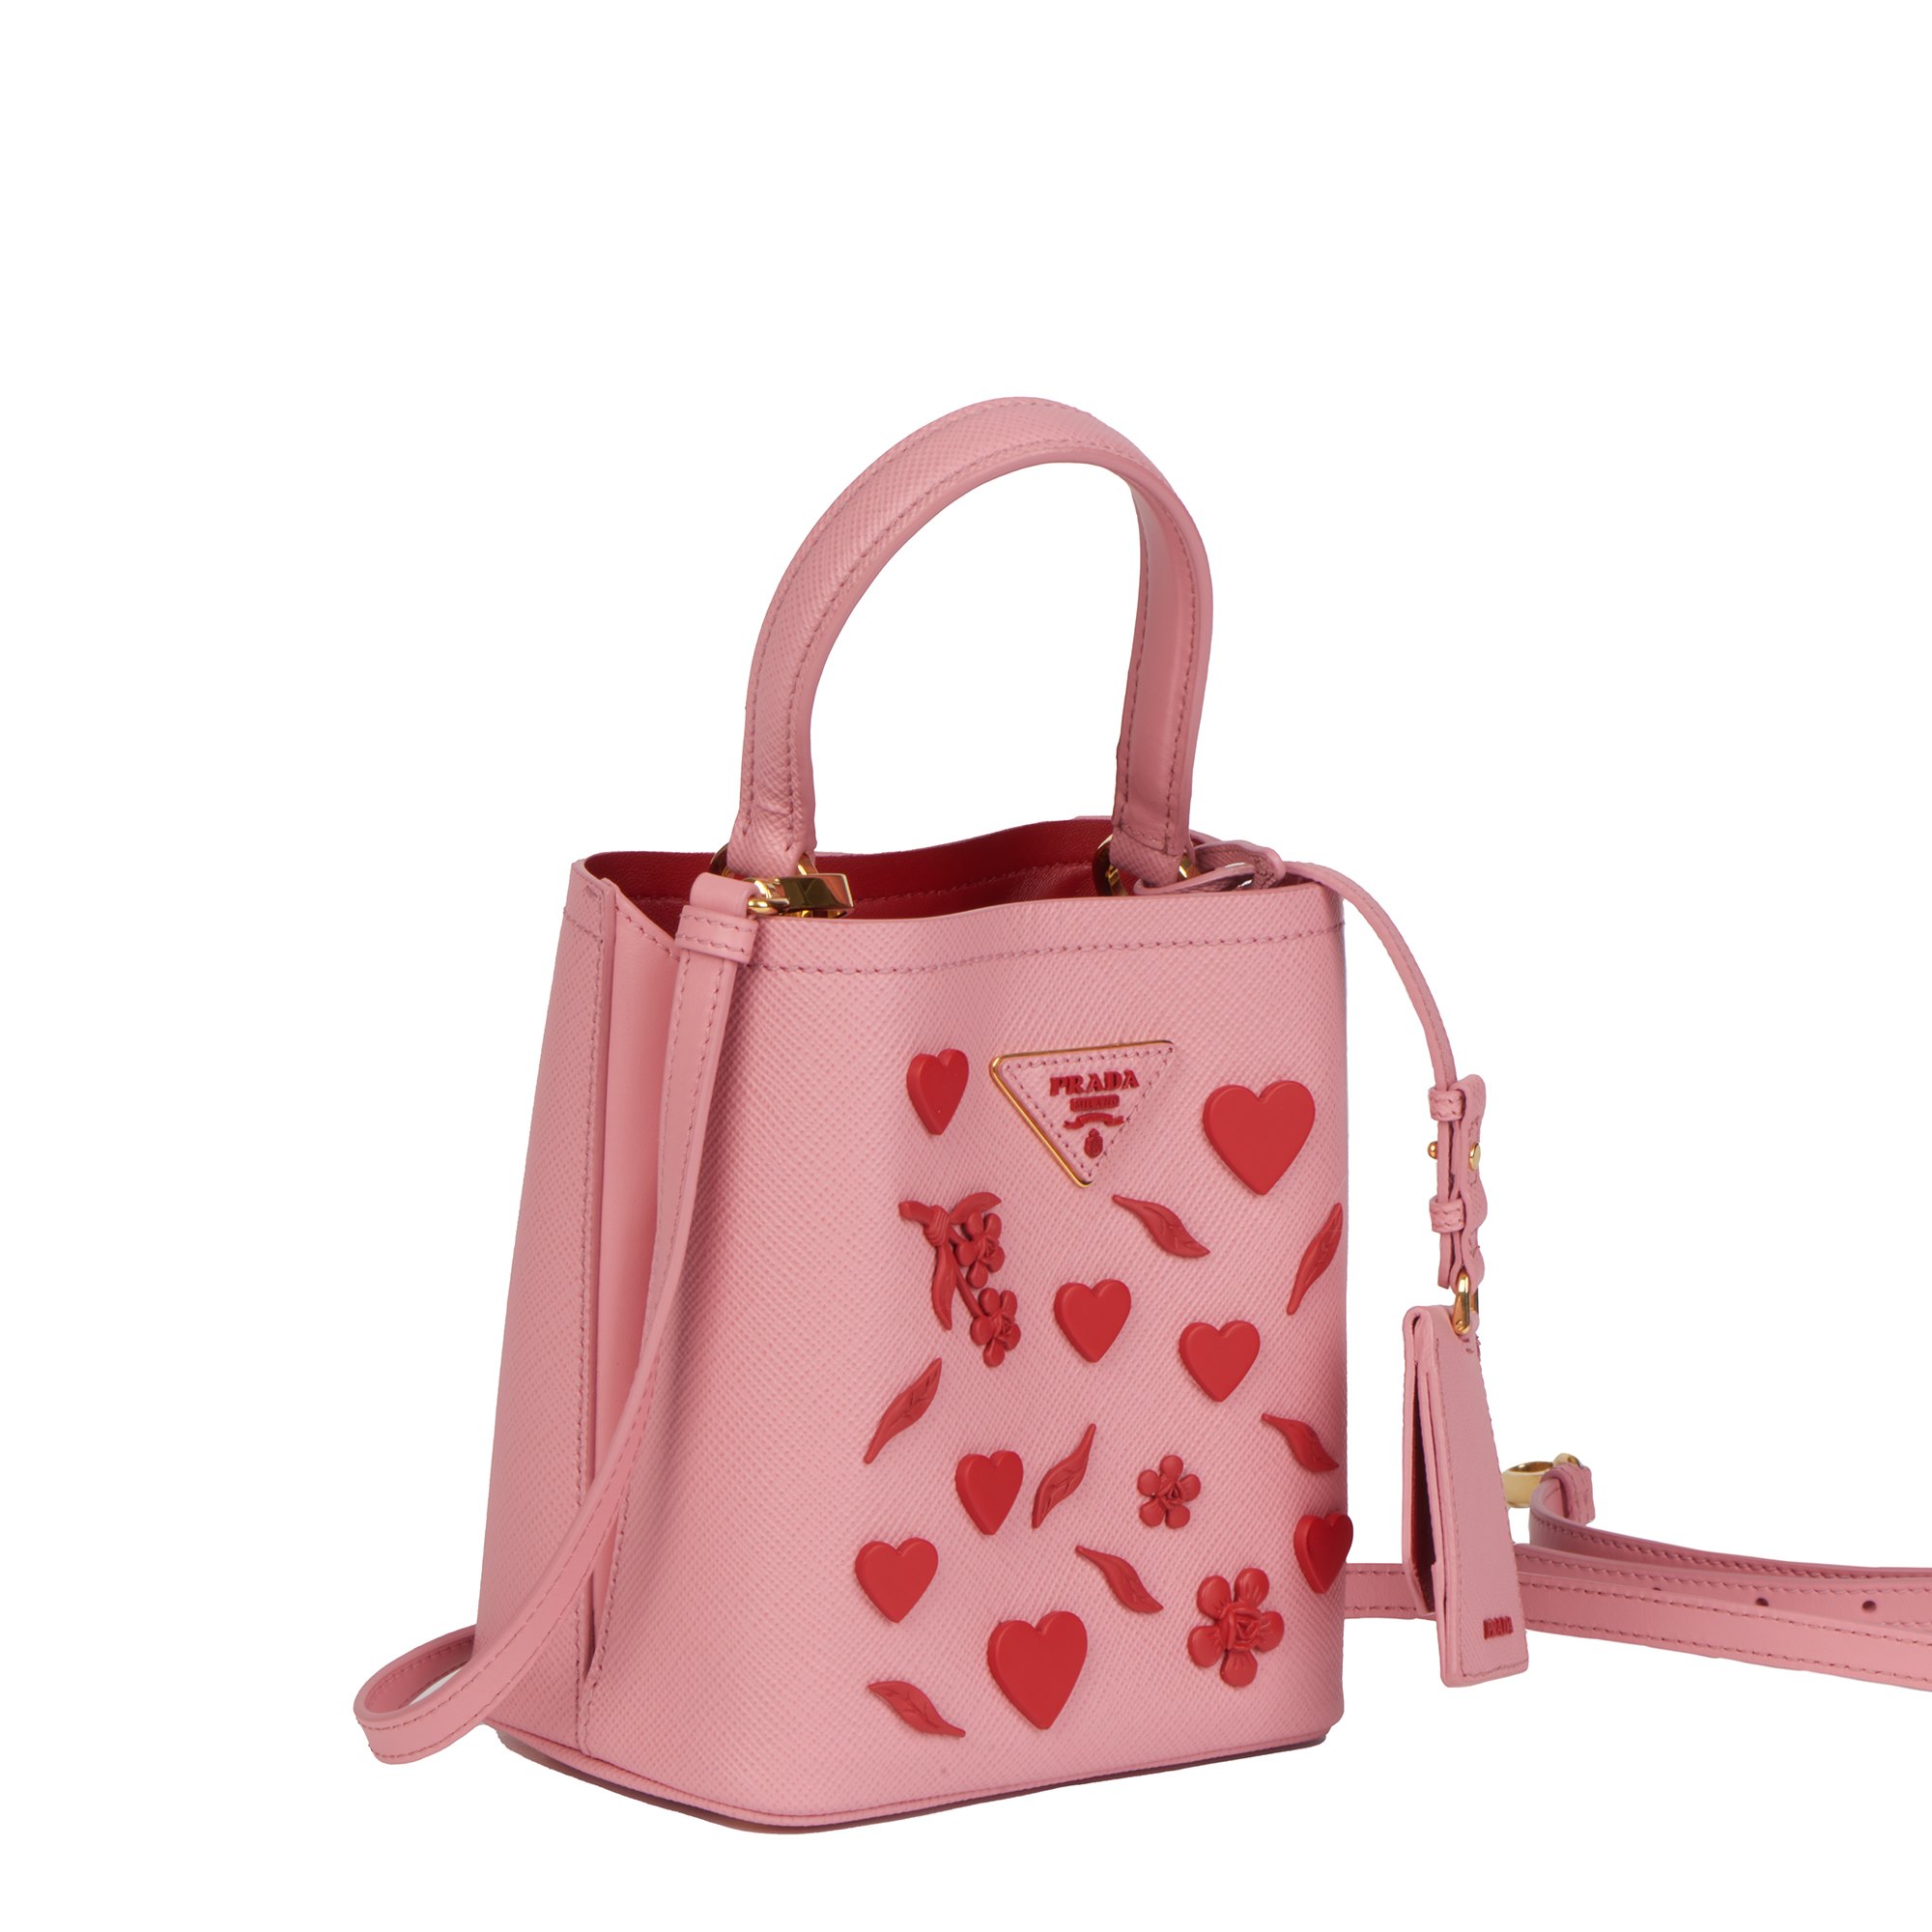 Prada Petal Pink Saffiano Leather & Fiery Red Rubber Embellished Small Panier